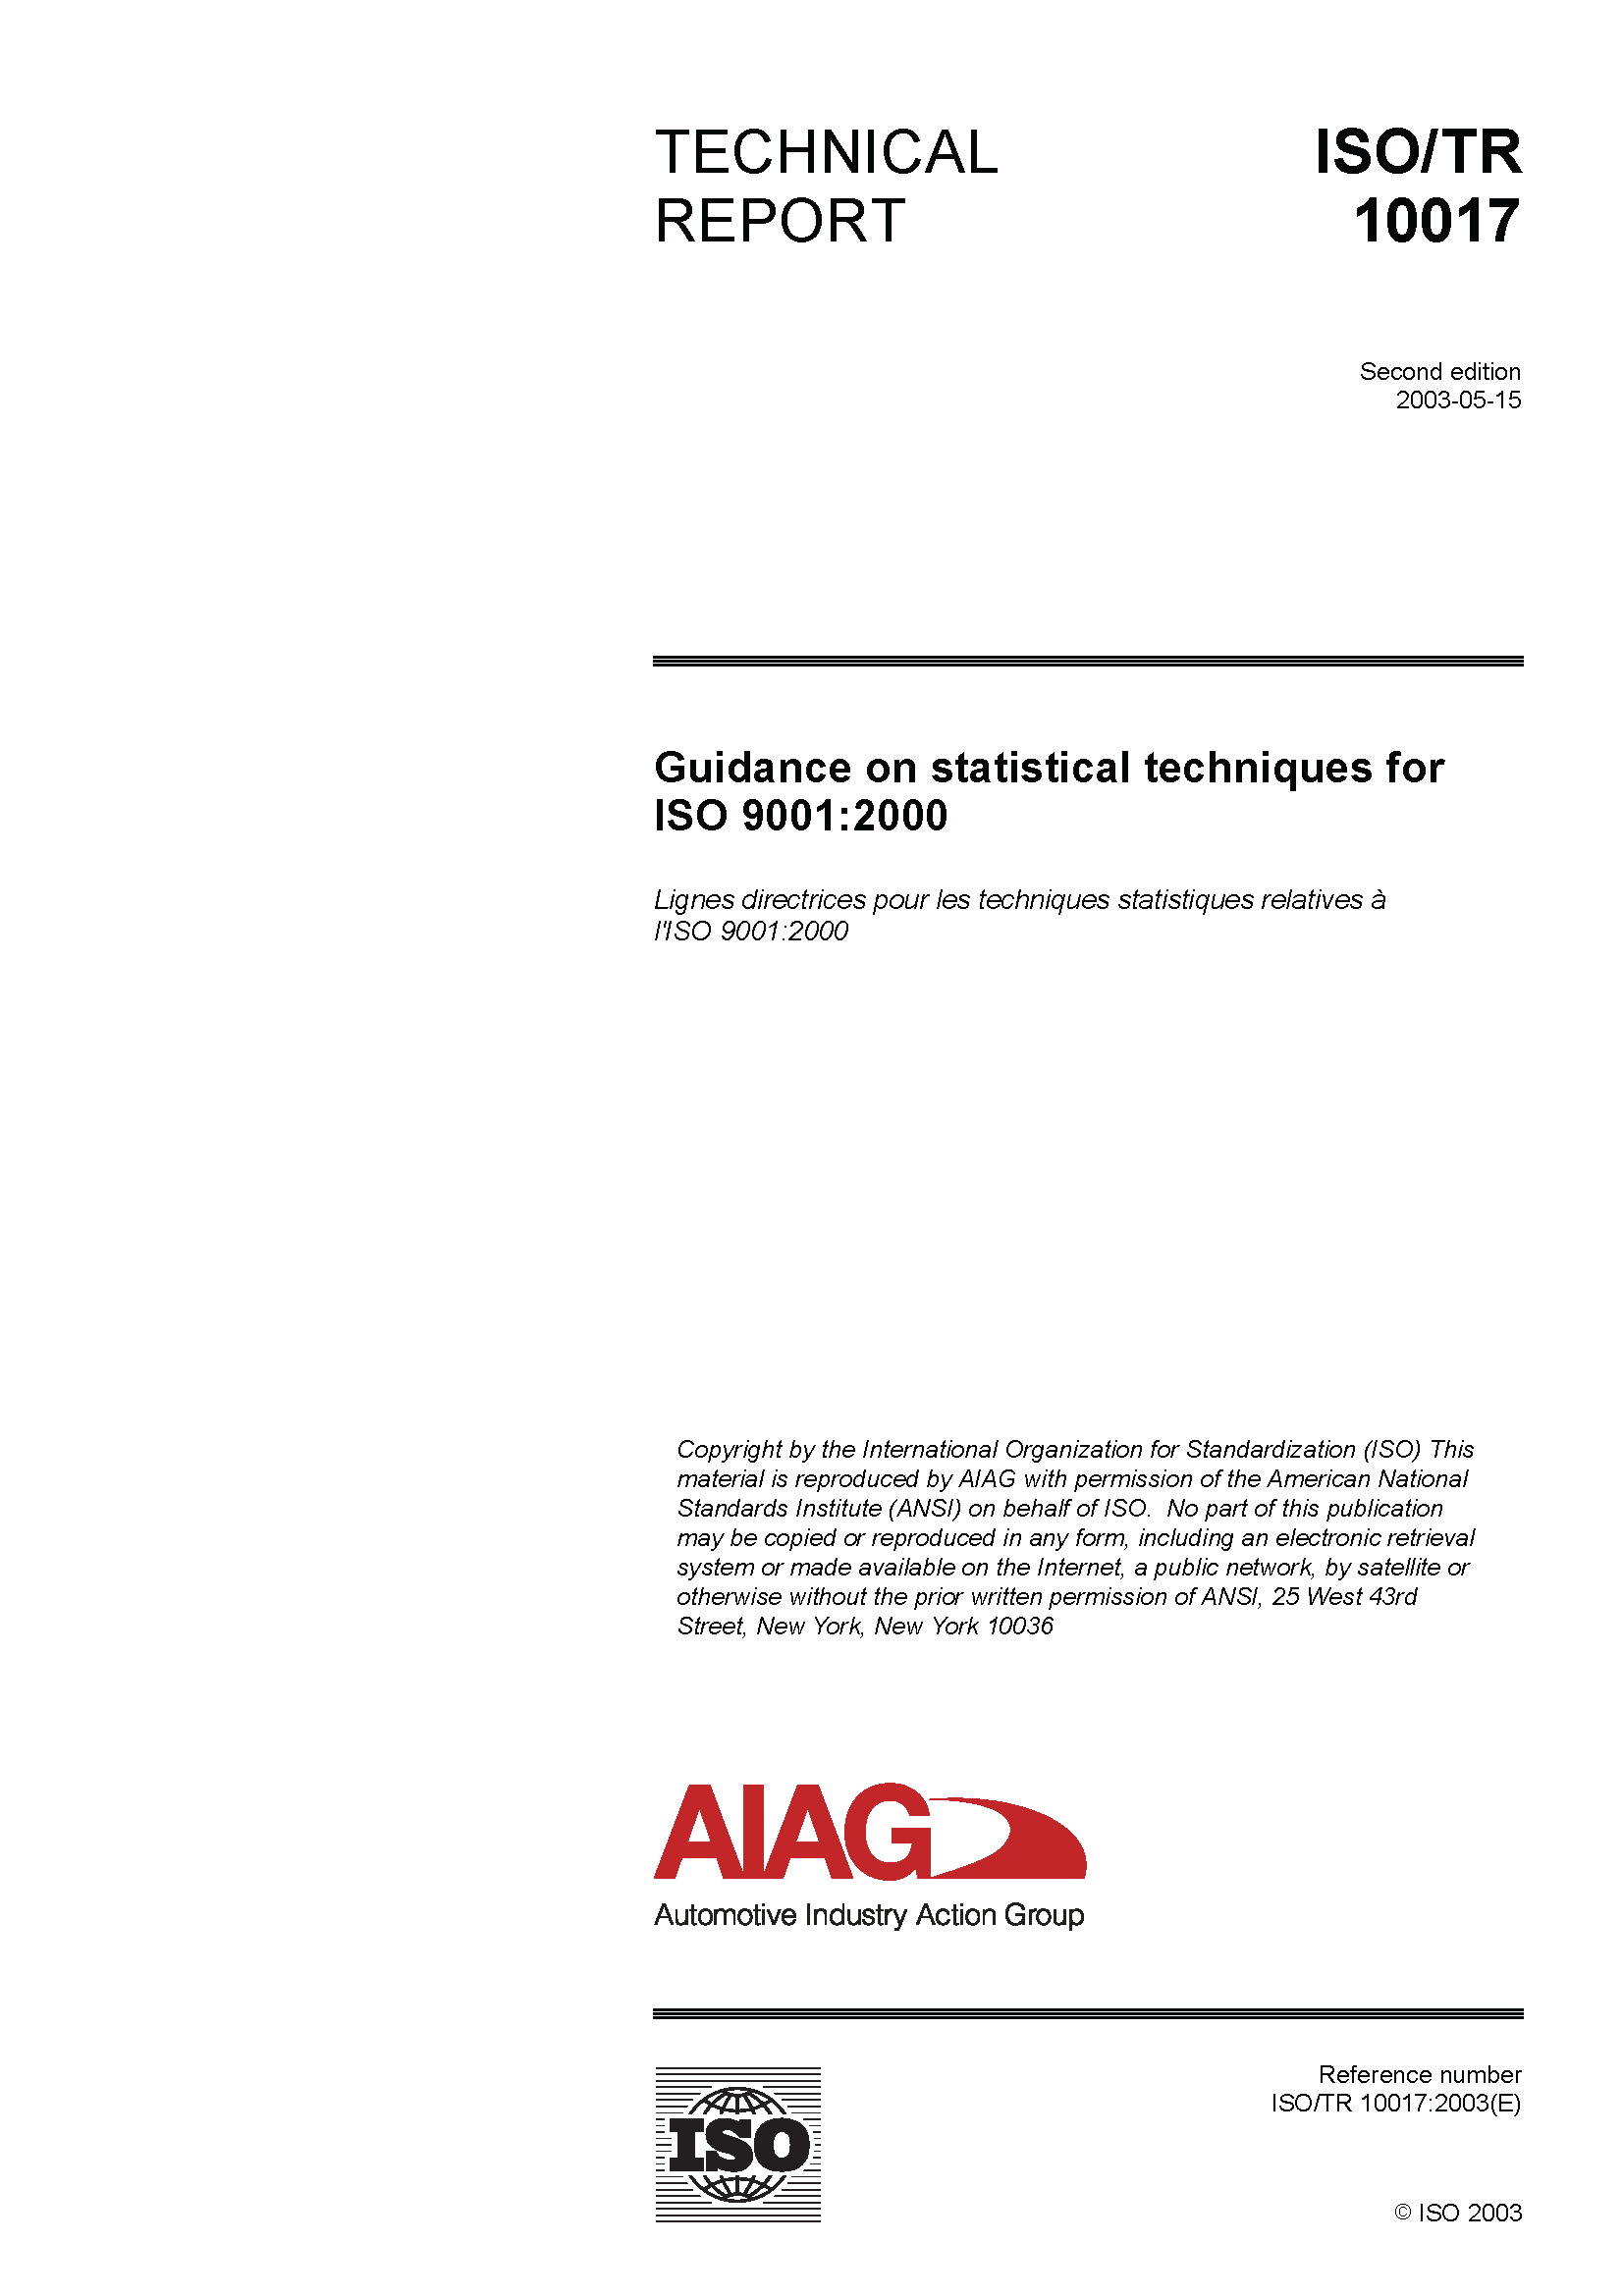 Náhľad  Guidance on Statistical Techniques for ISO 9001:2000 1.5.2003